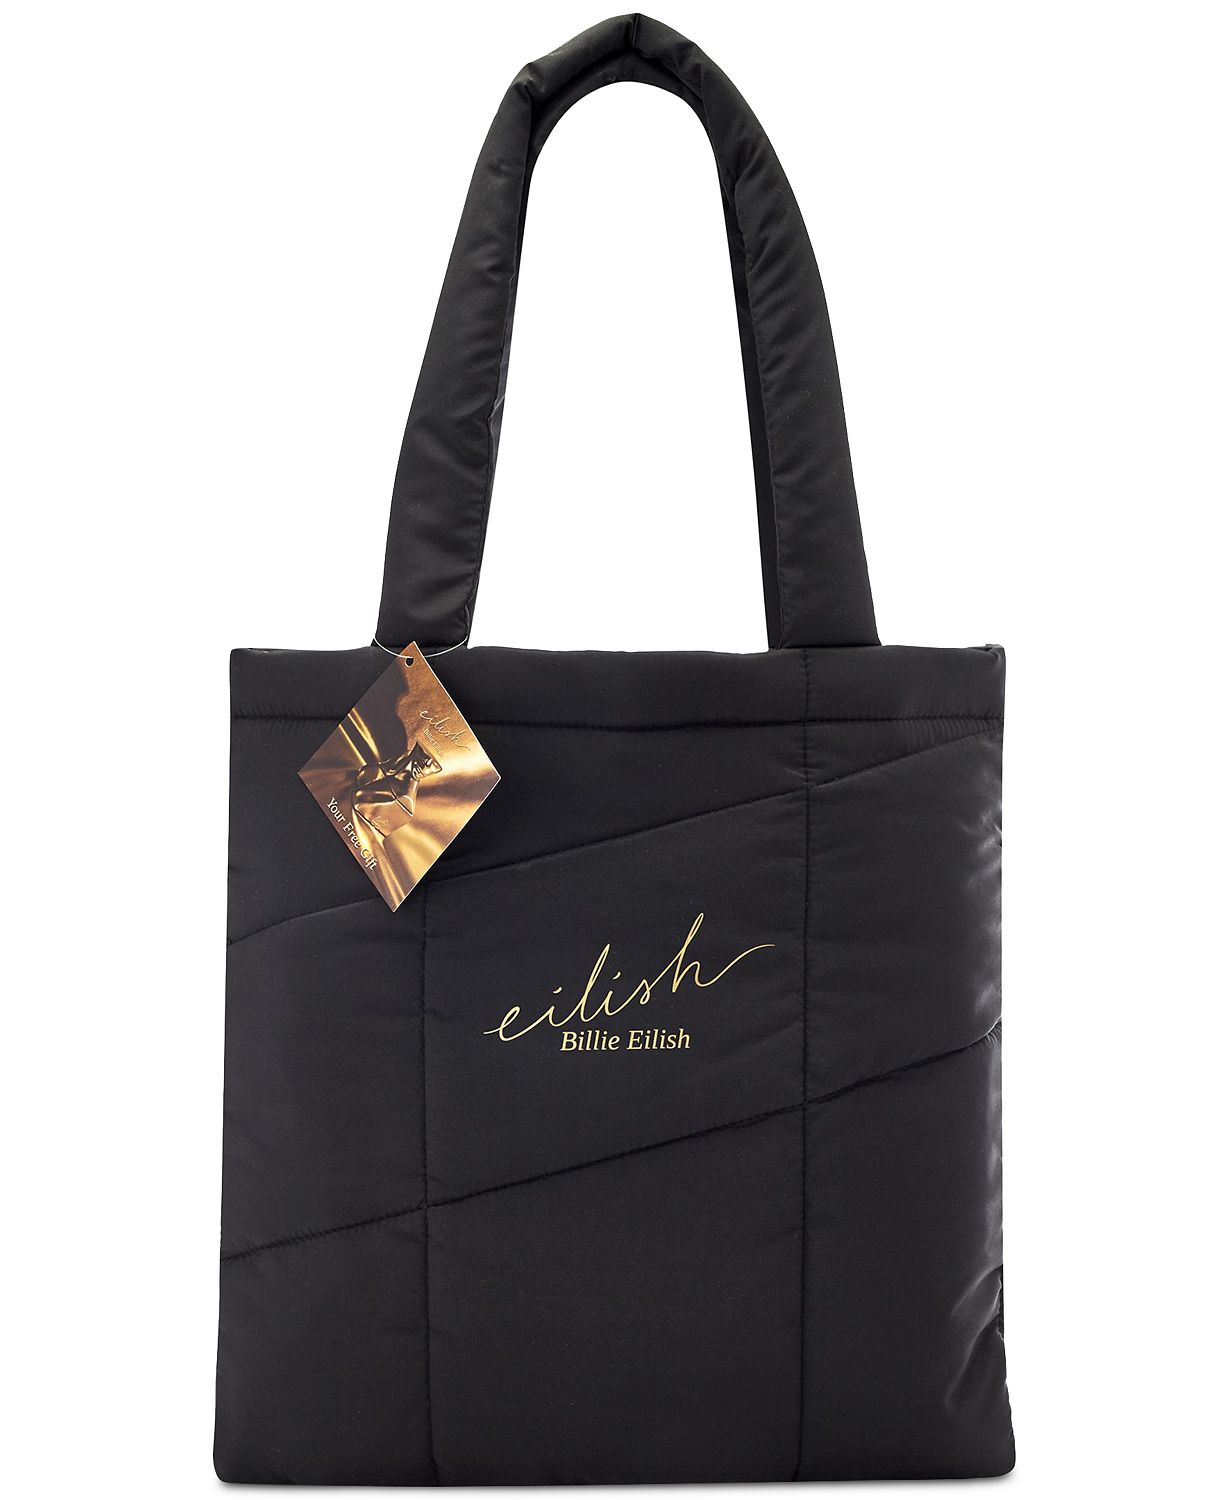 FREE tote bag with large spray purchase from the Billie Eilish fragrance collection